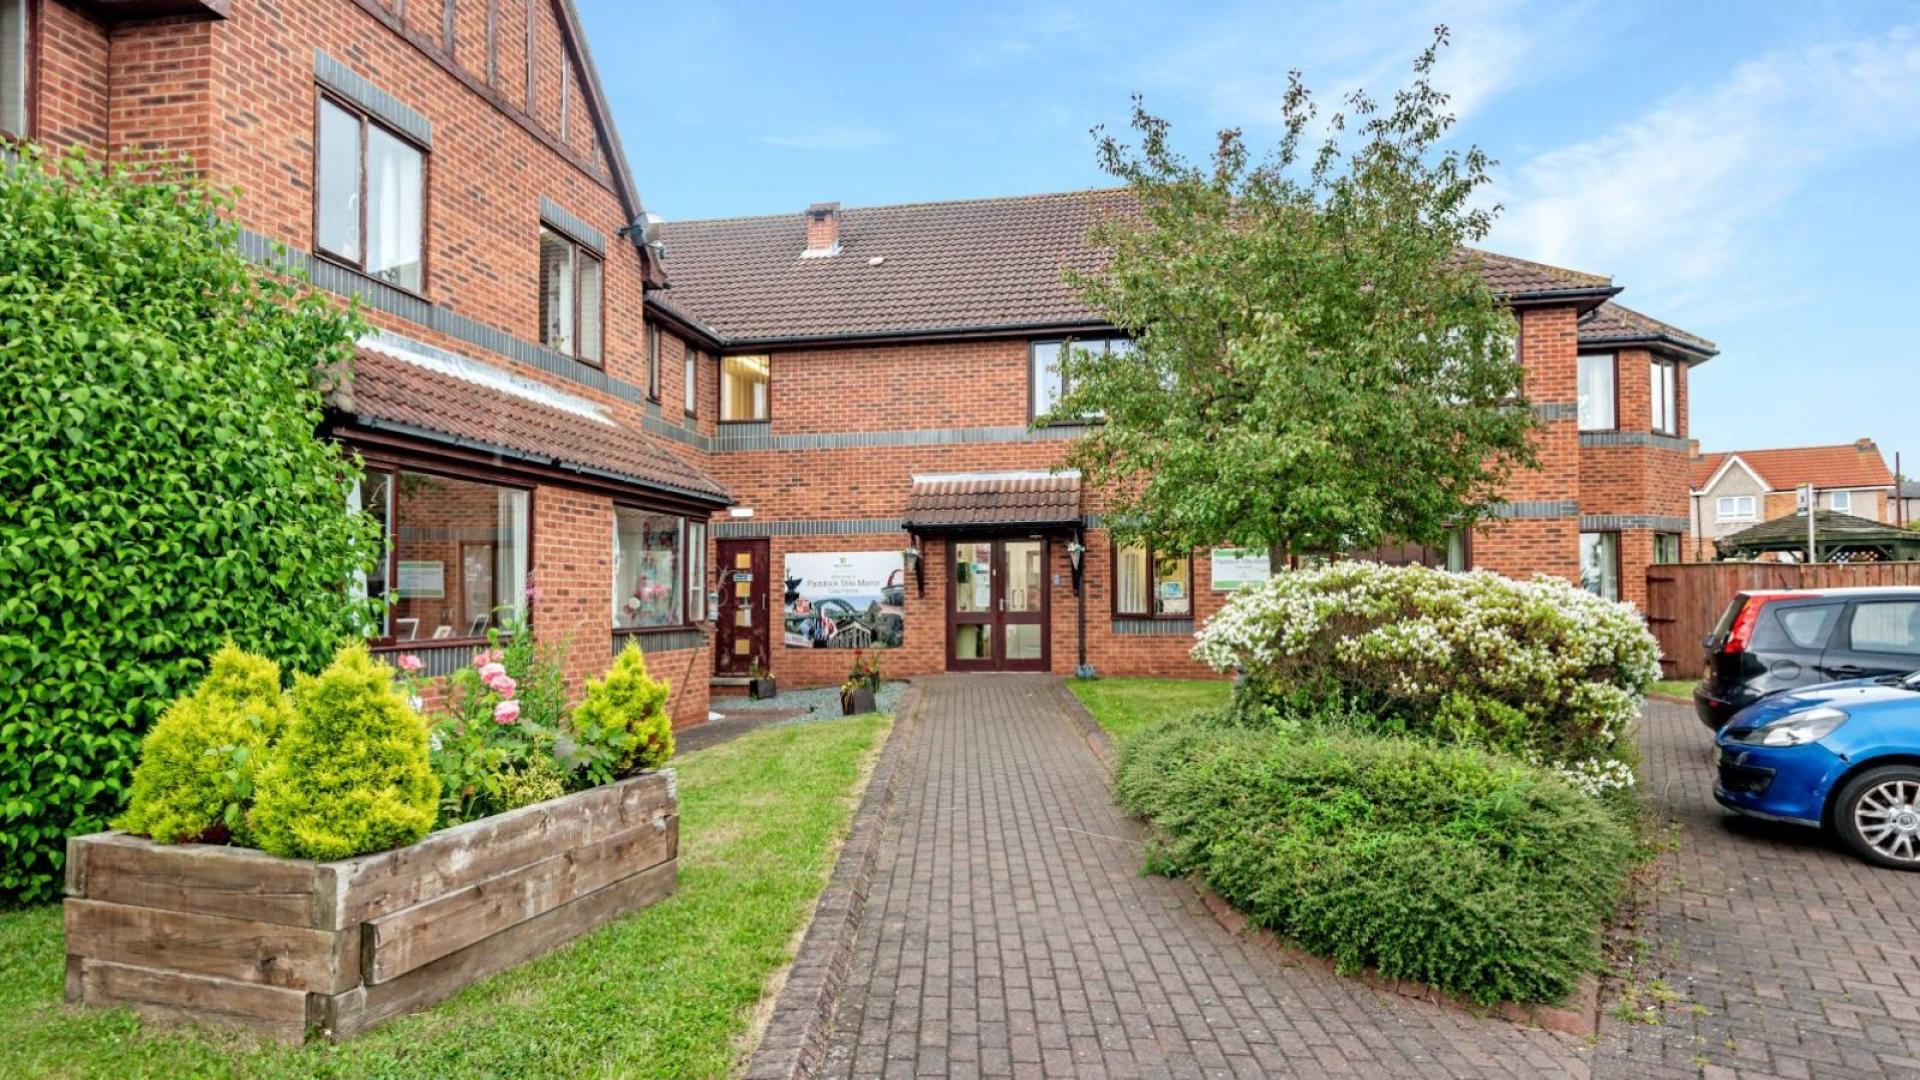 Welcome to Paddock Stile Manor Dementia Care Home 